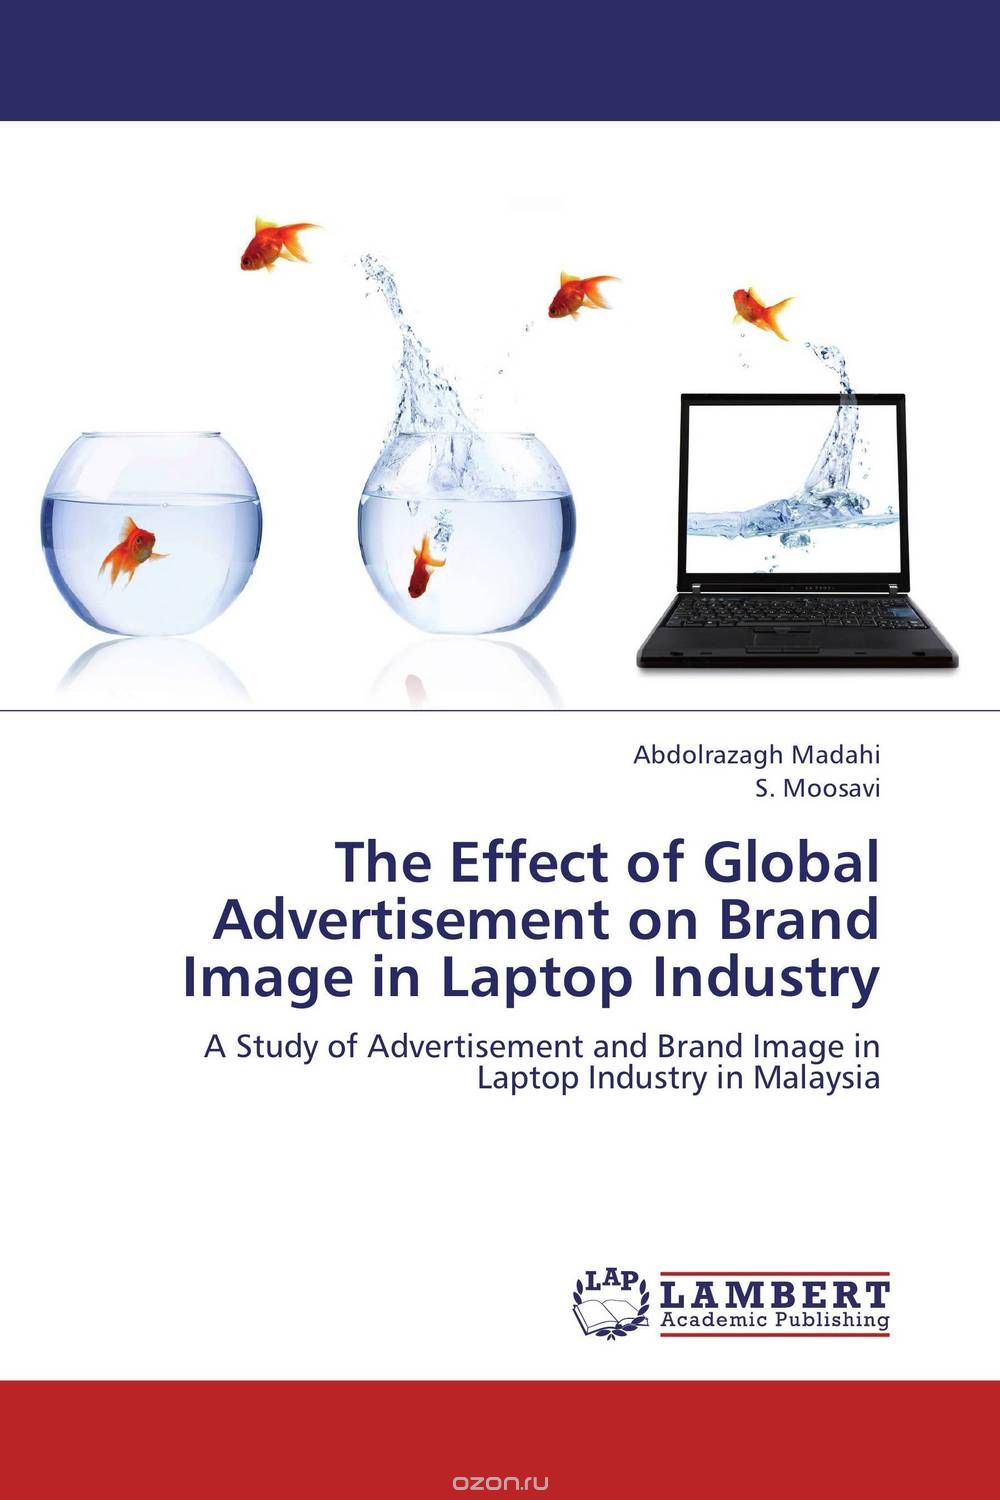 The Effect of Global Advertisement on Brand Image in Laptop Industry